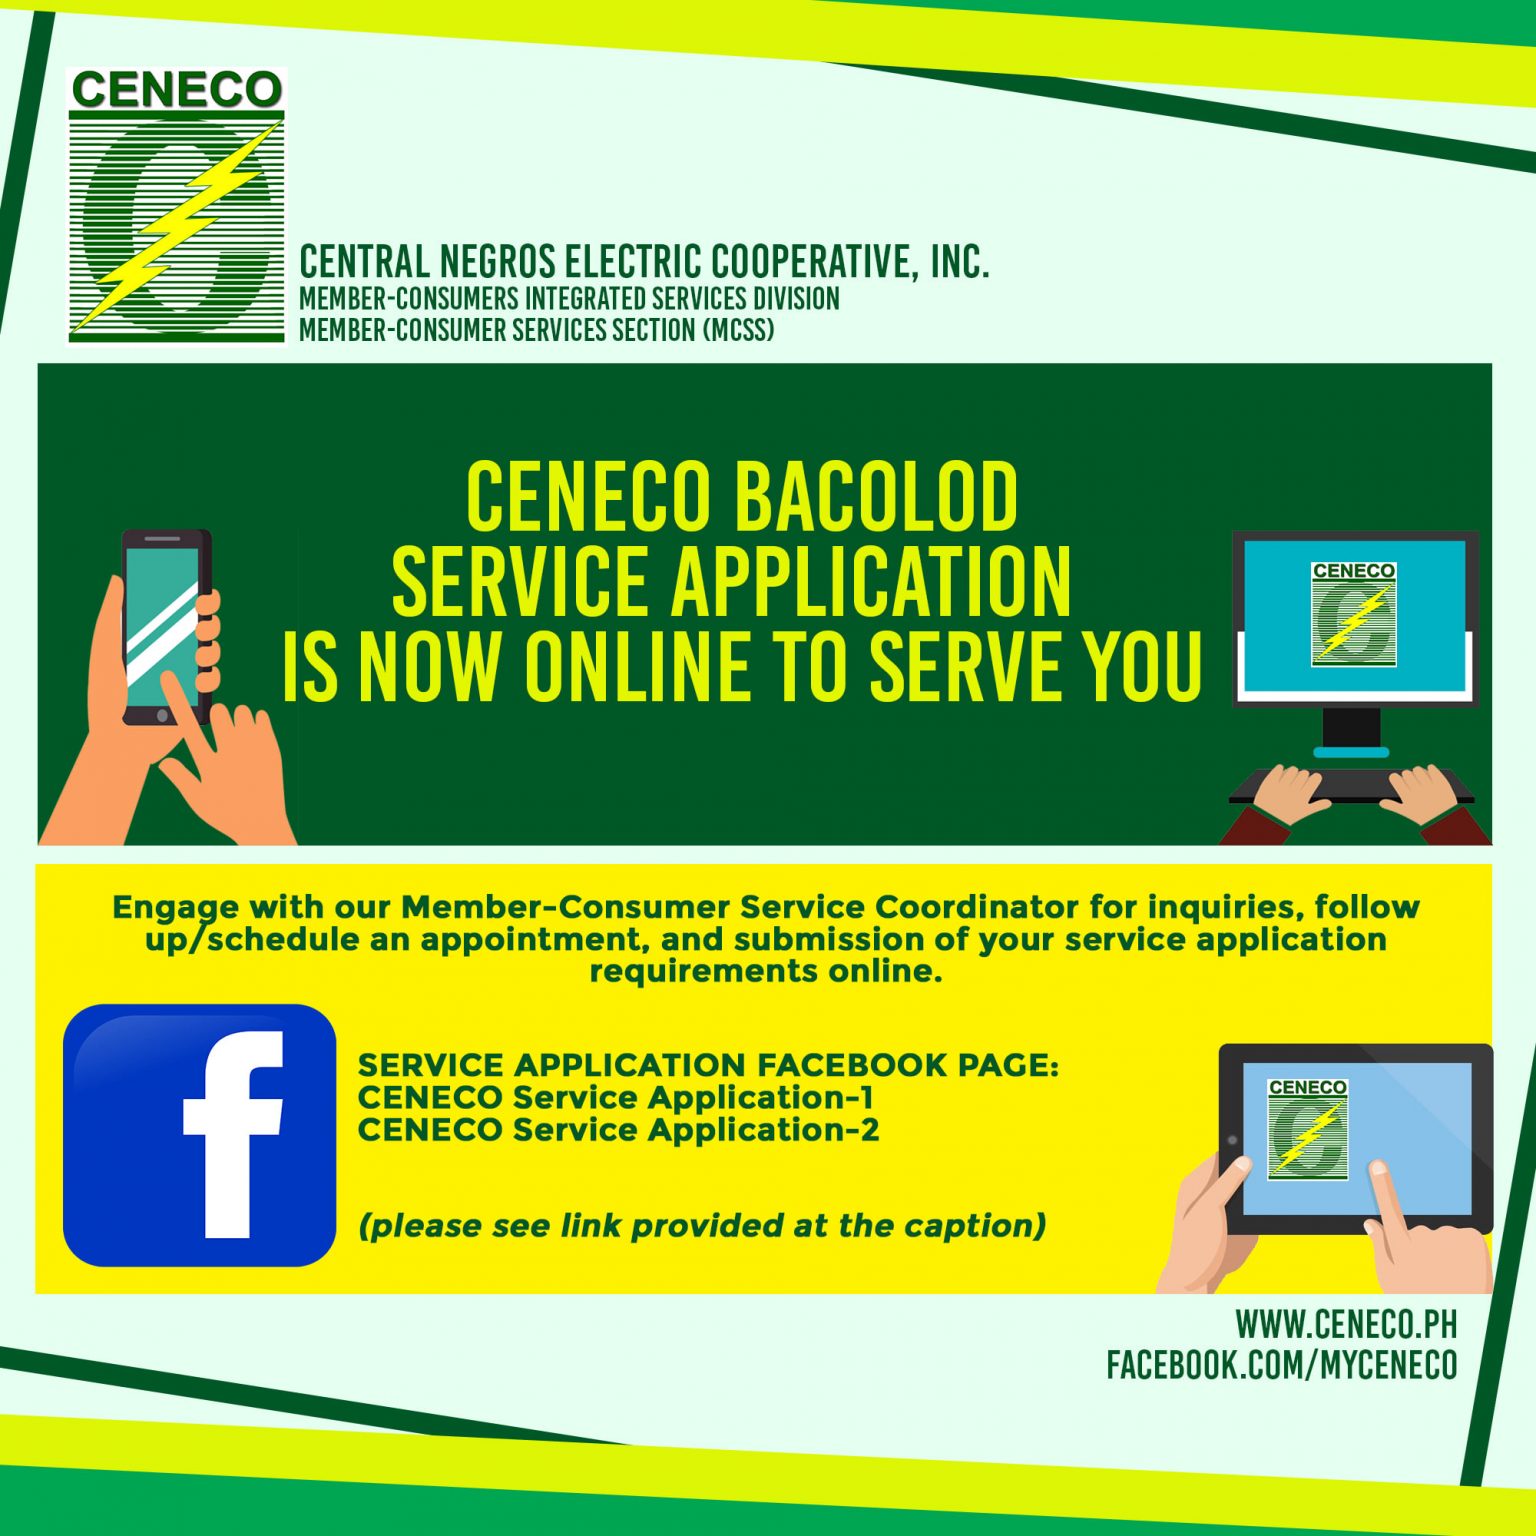 CENECO BACOLOD SERVICE APPLICATION IS NOW ONLINE TO SERVE YOU - Central